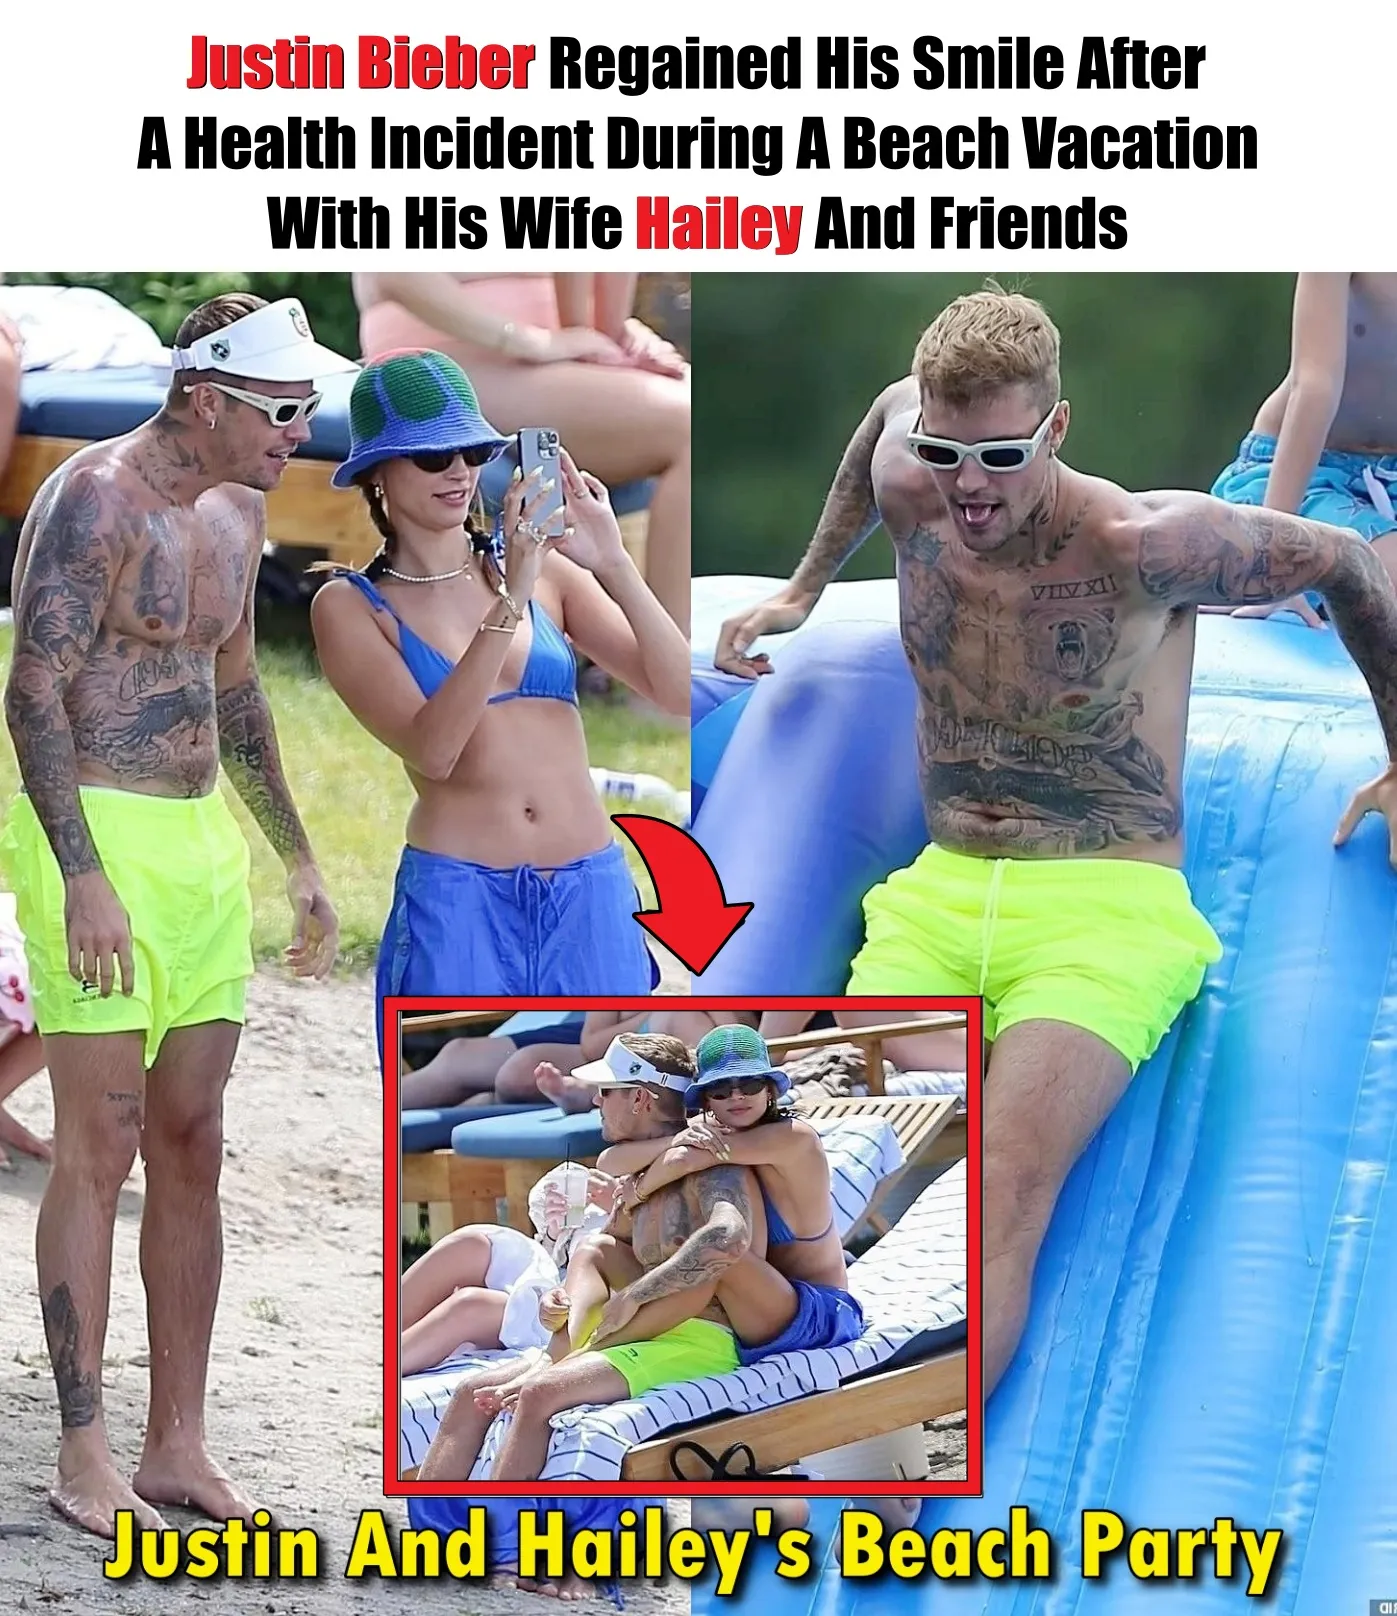 Cover Image for Justin Bieber Regained His Smile After A Health Incident During A Beach Vacation With His Wife Hailey And Friends!!